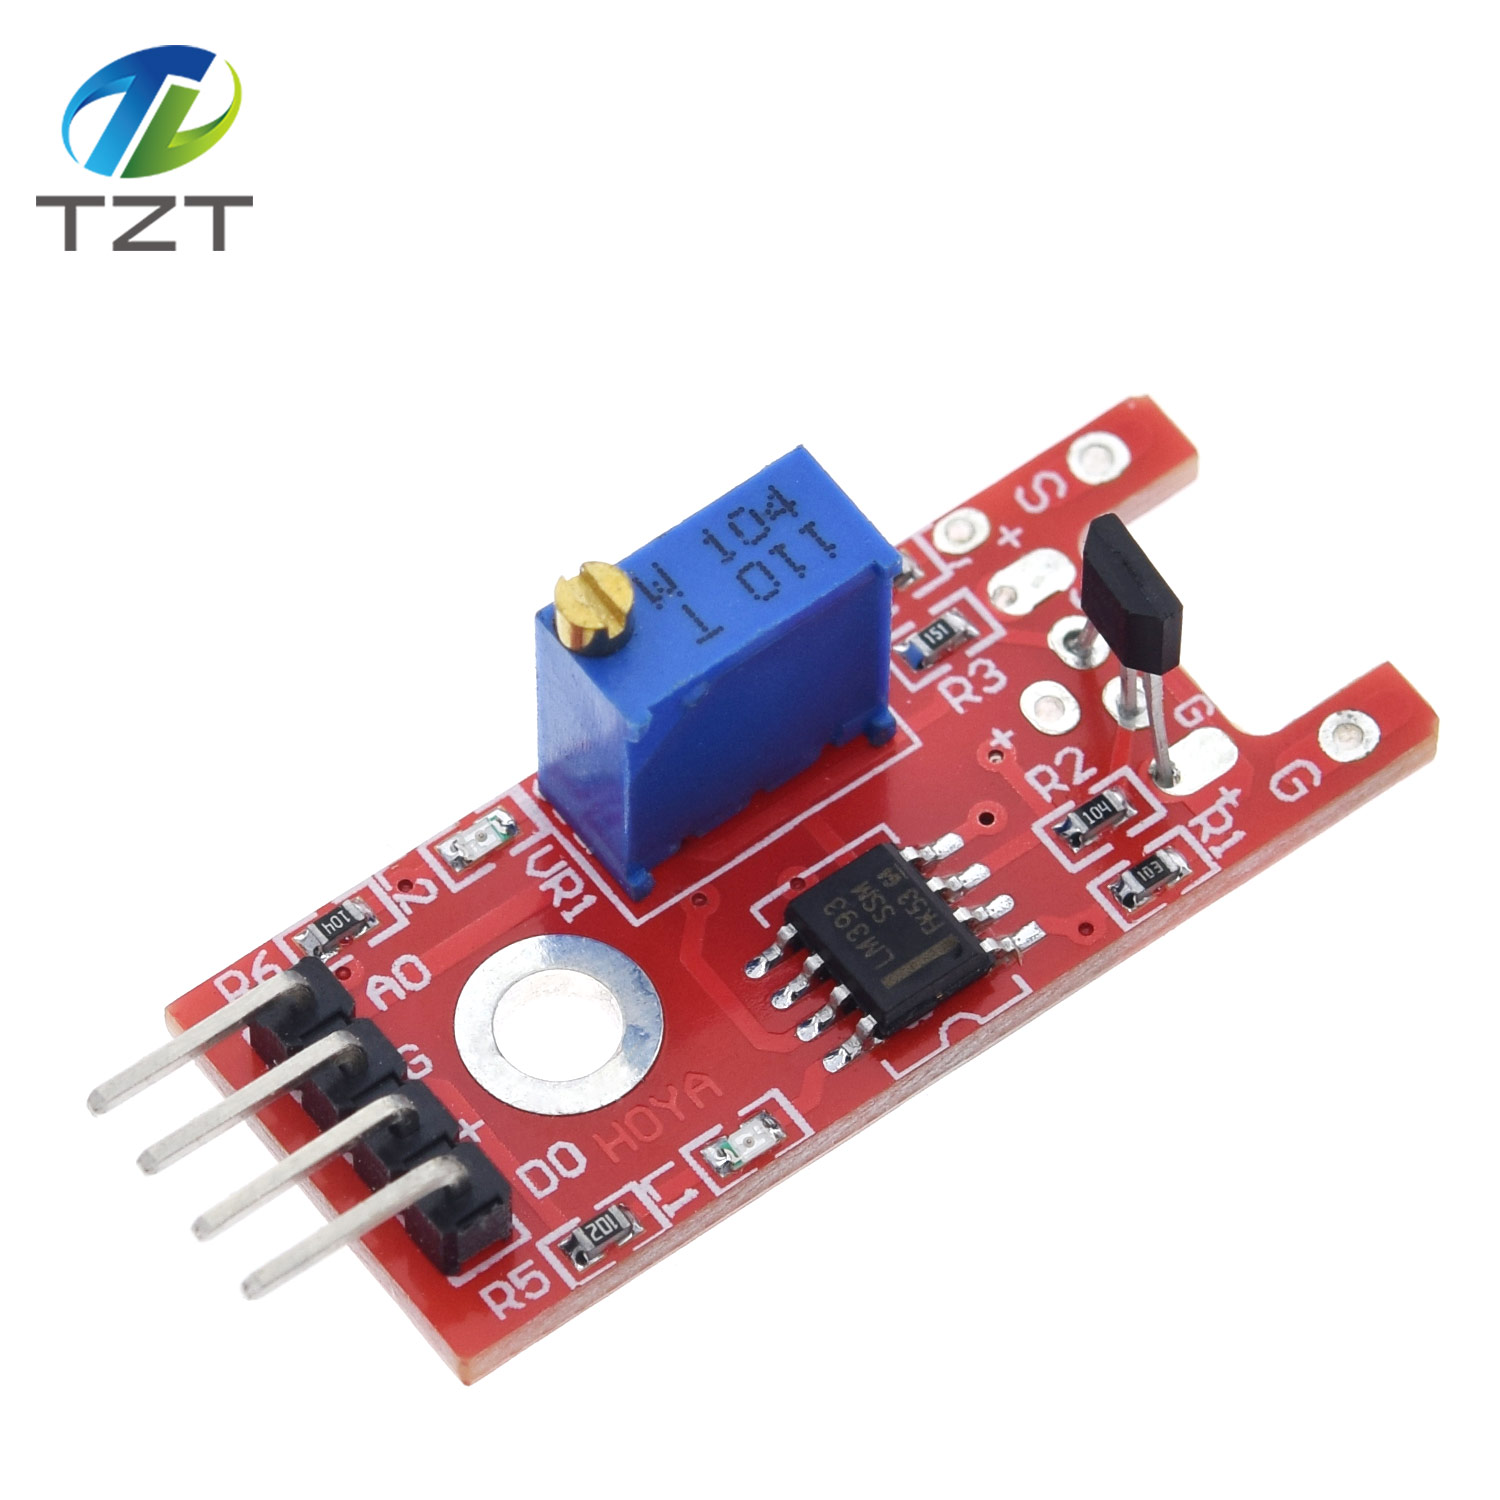 KY-024 Linear Magnetic Hall Sensor Board Switch Speed Counting Hall Sensors Module For Arduino Diy KY024 Hall Sensor for arduino